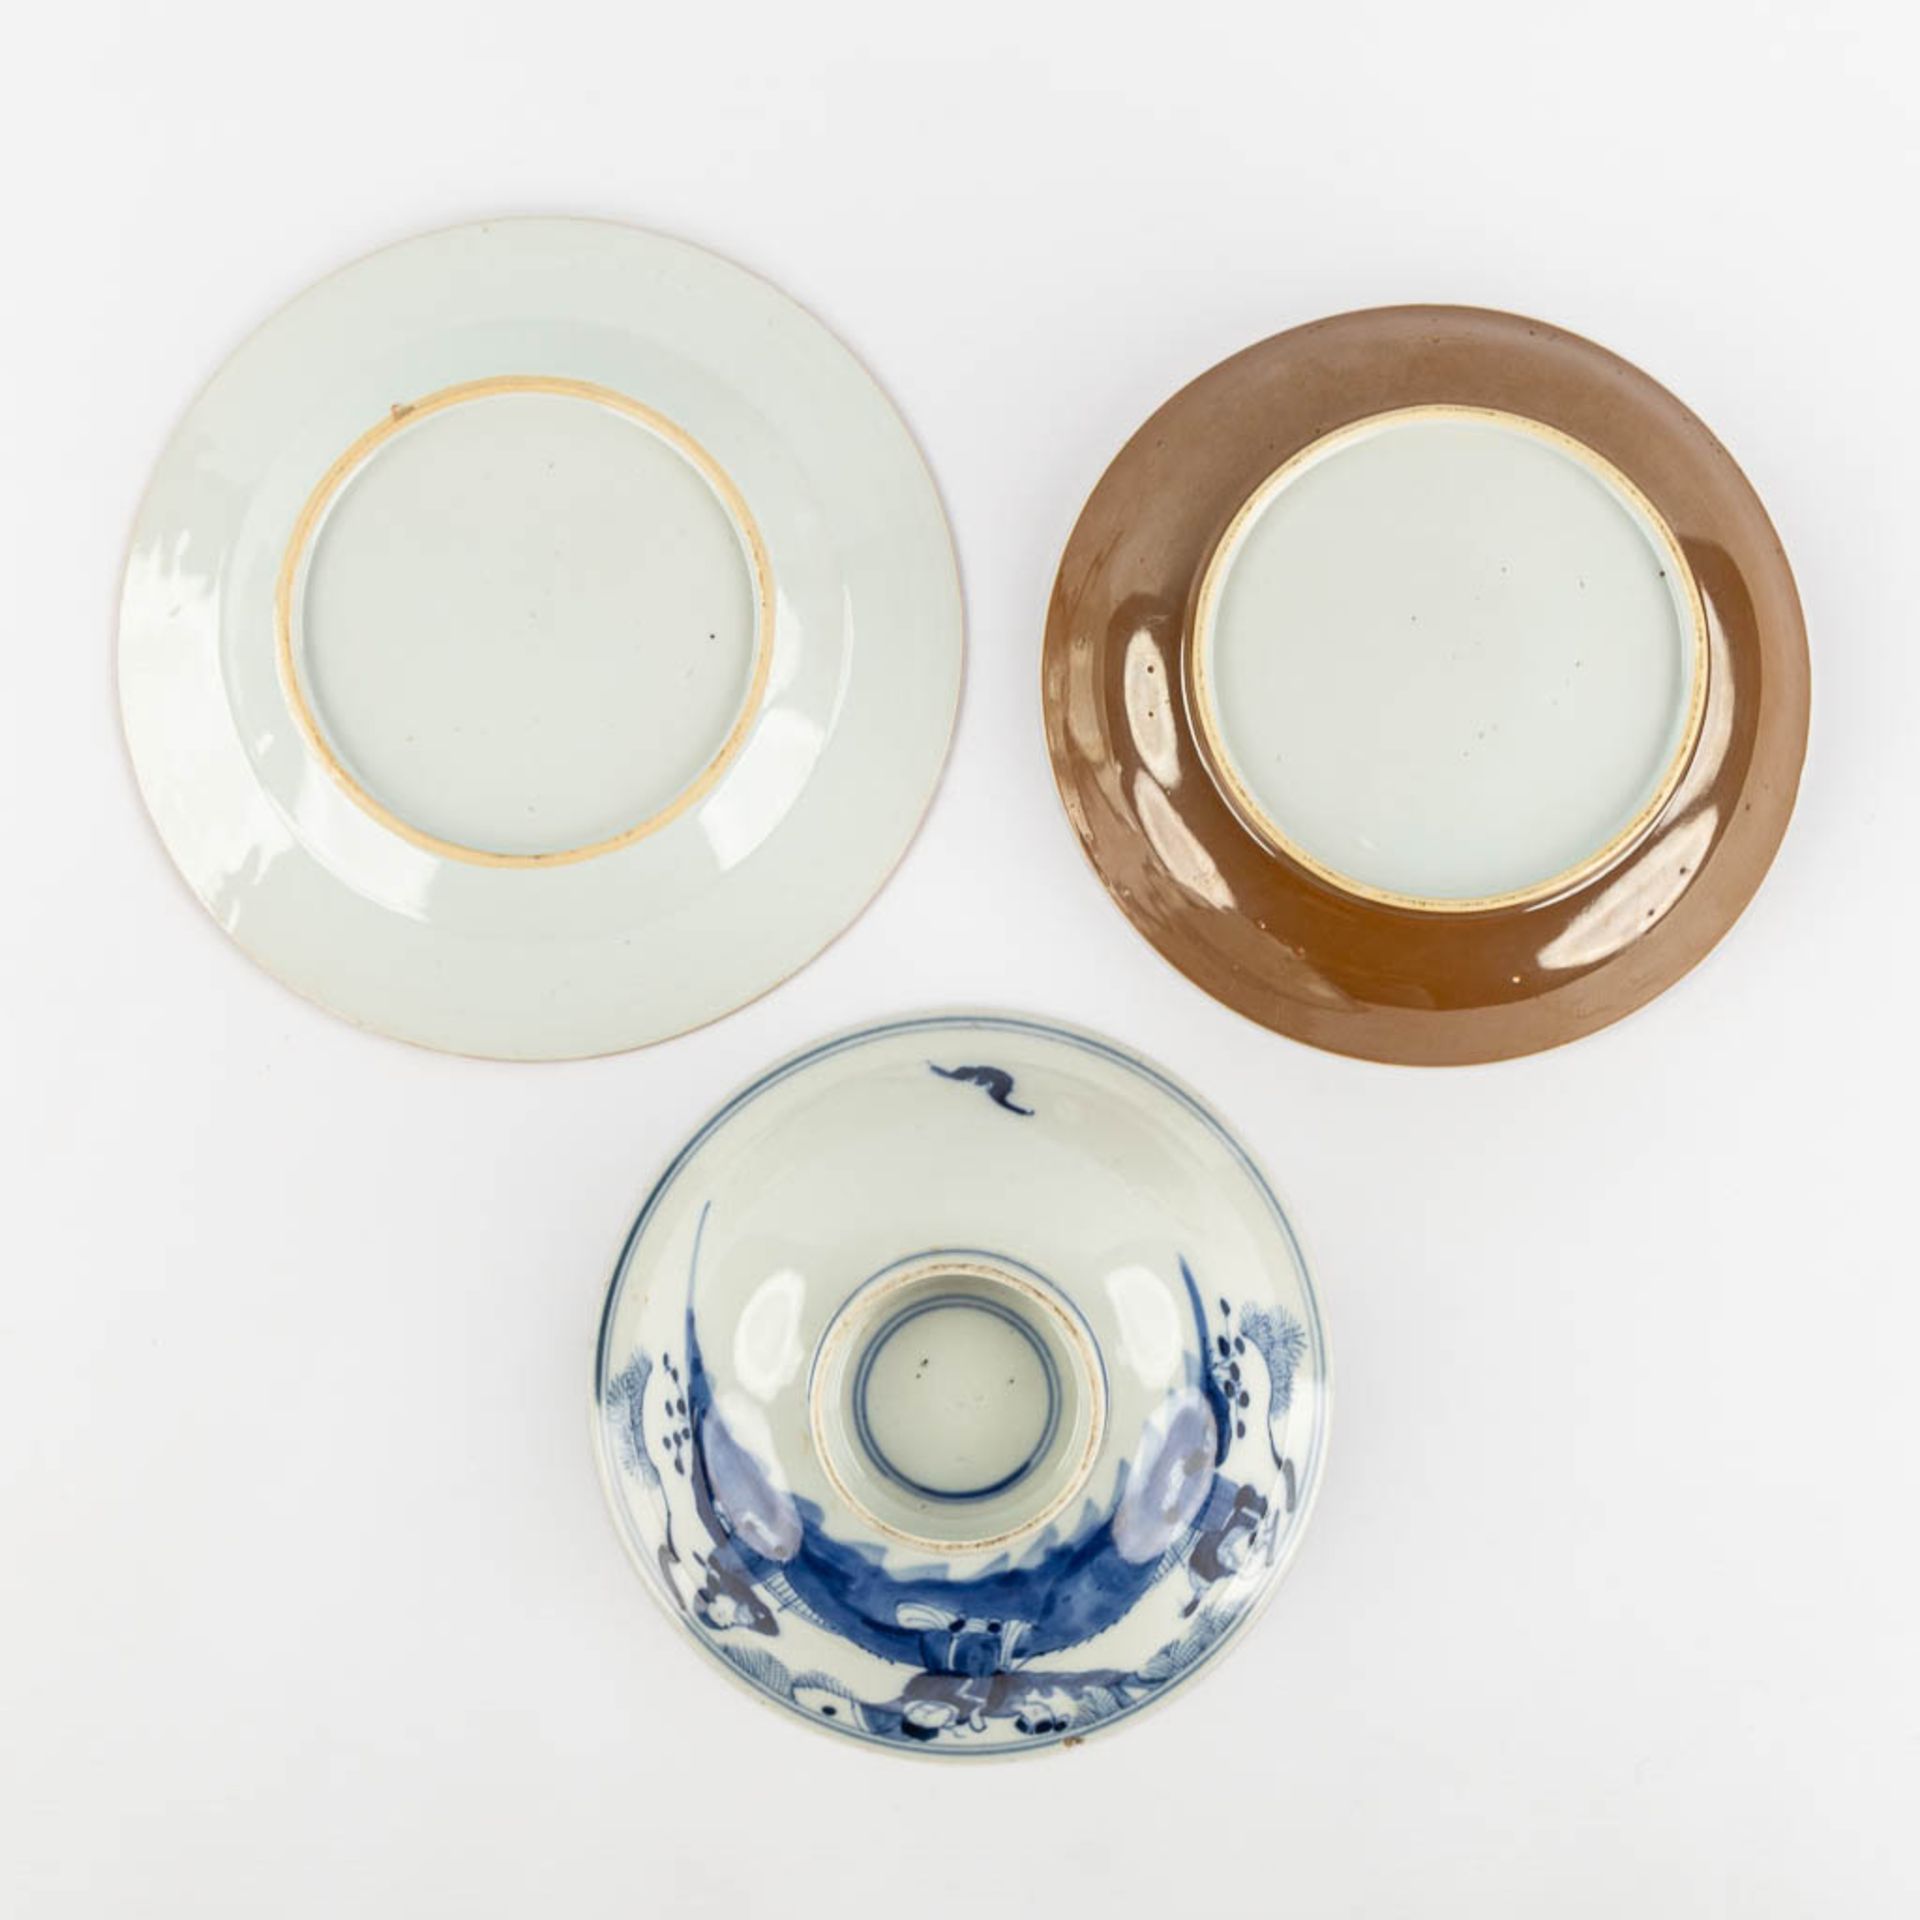 Fifteen Chinese cups, saucers and plates, blue white and Famille Roze. (D:23,4 cm) - Image 6 of 15